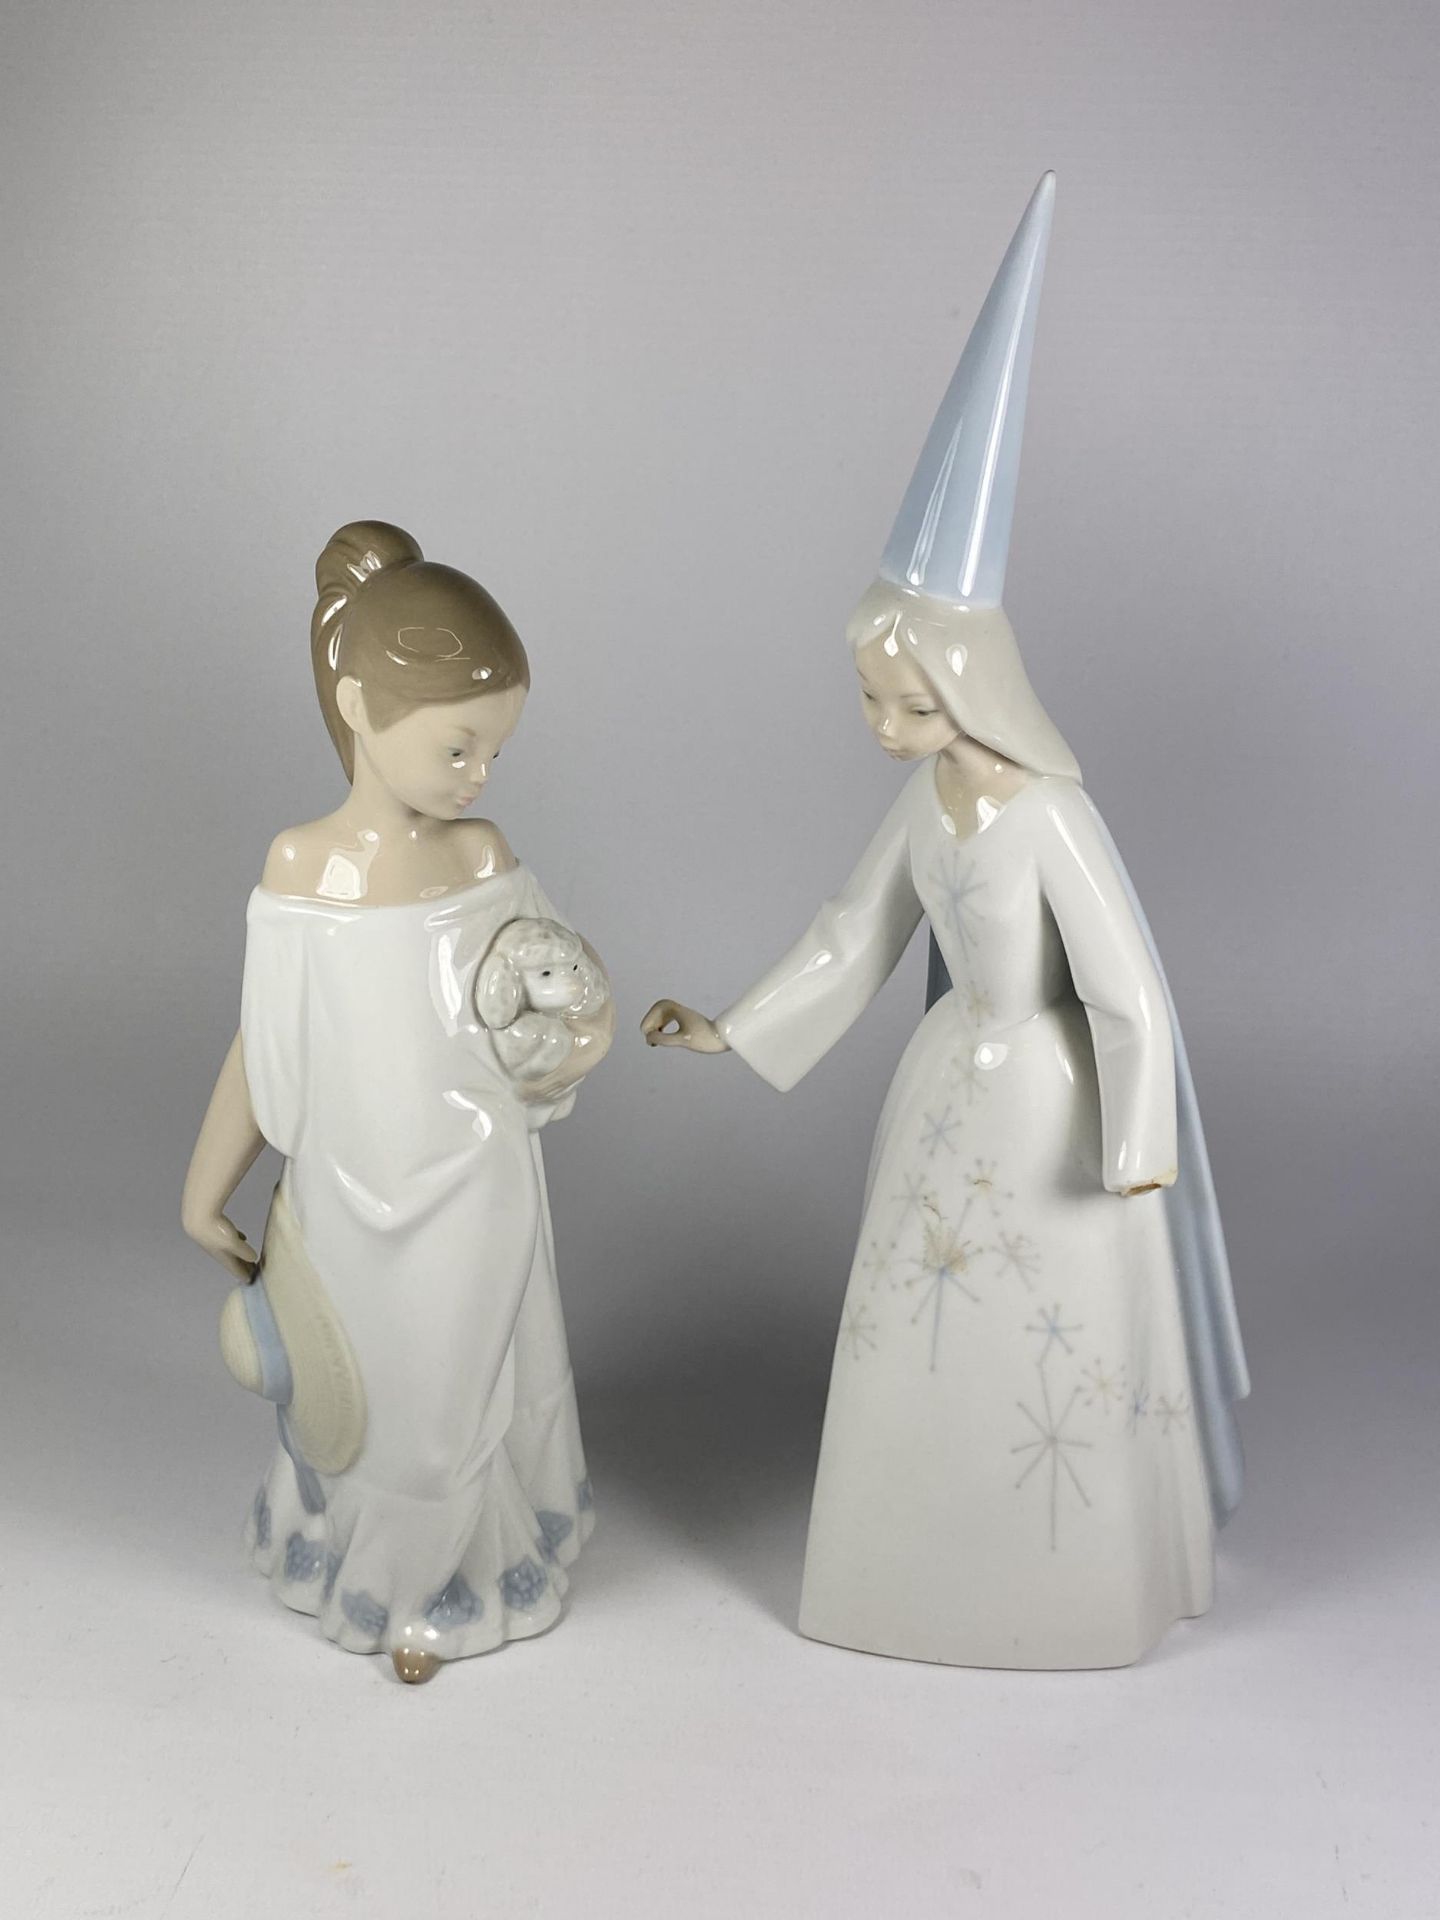 TWO CERAMIC FIGURES - ONE NAO AND ONE LLADRO (HAND A/F)